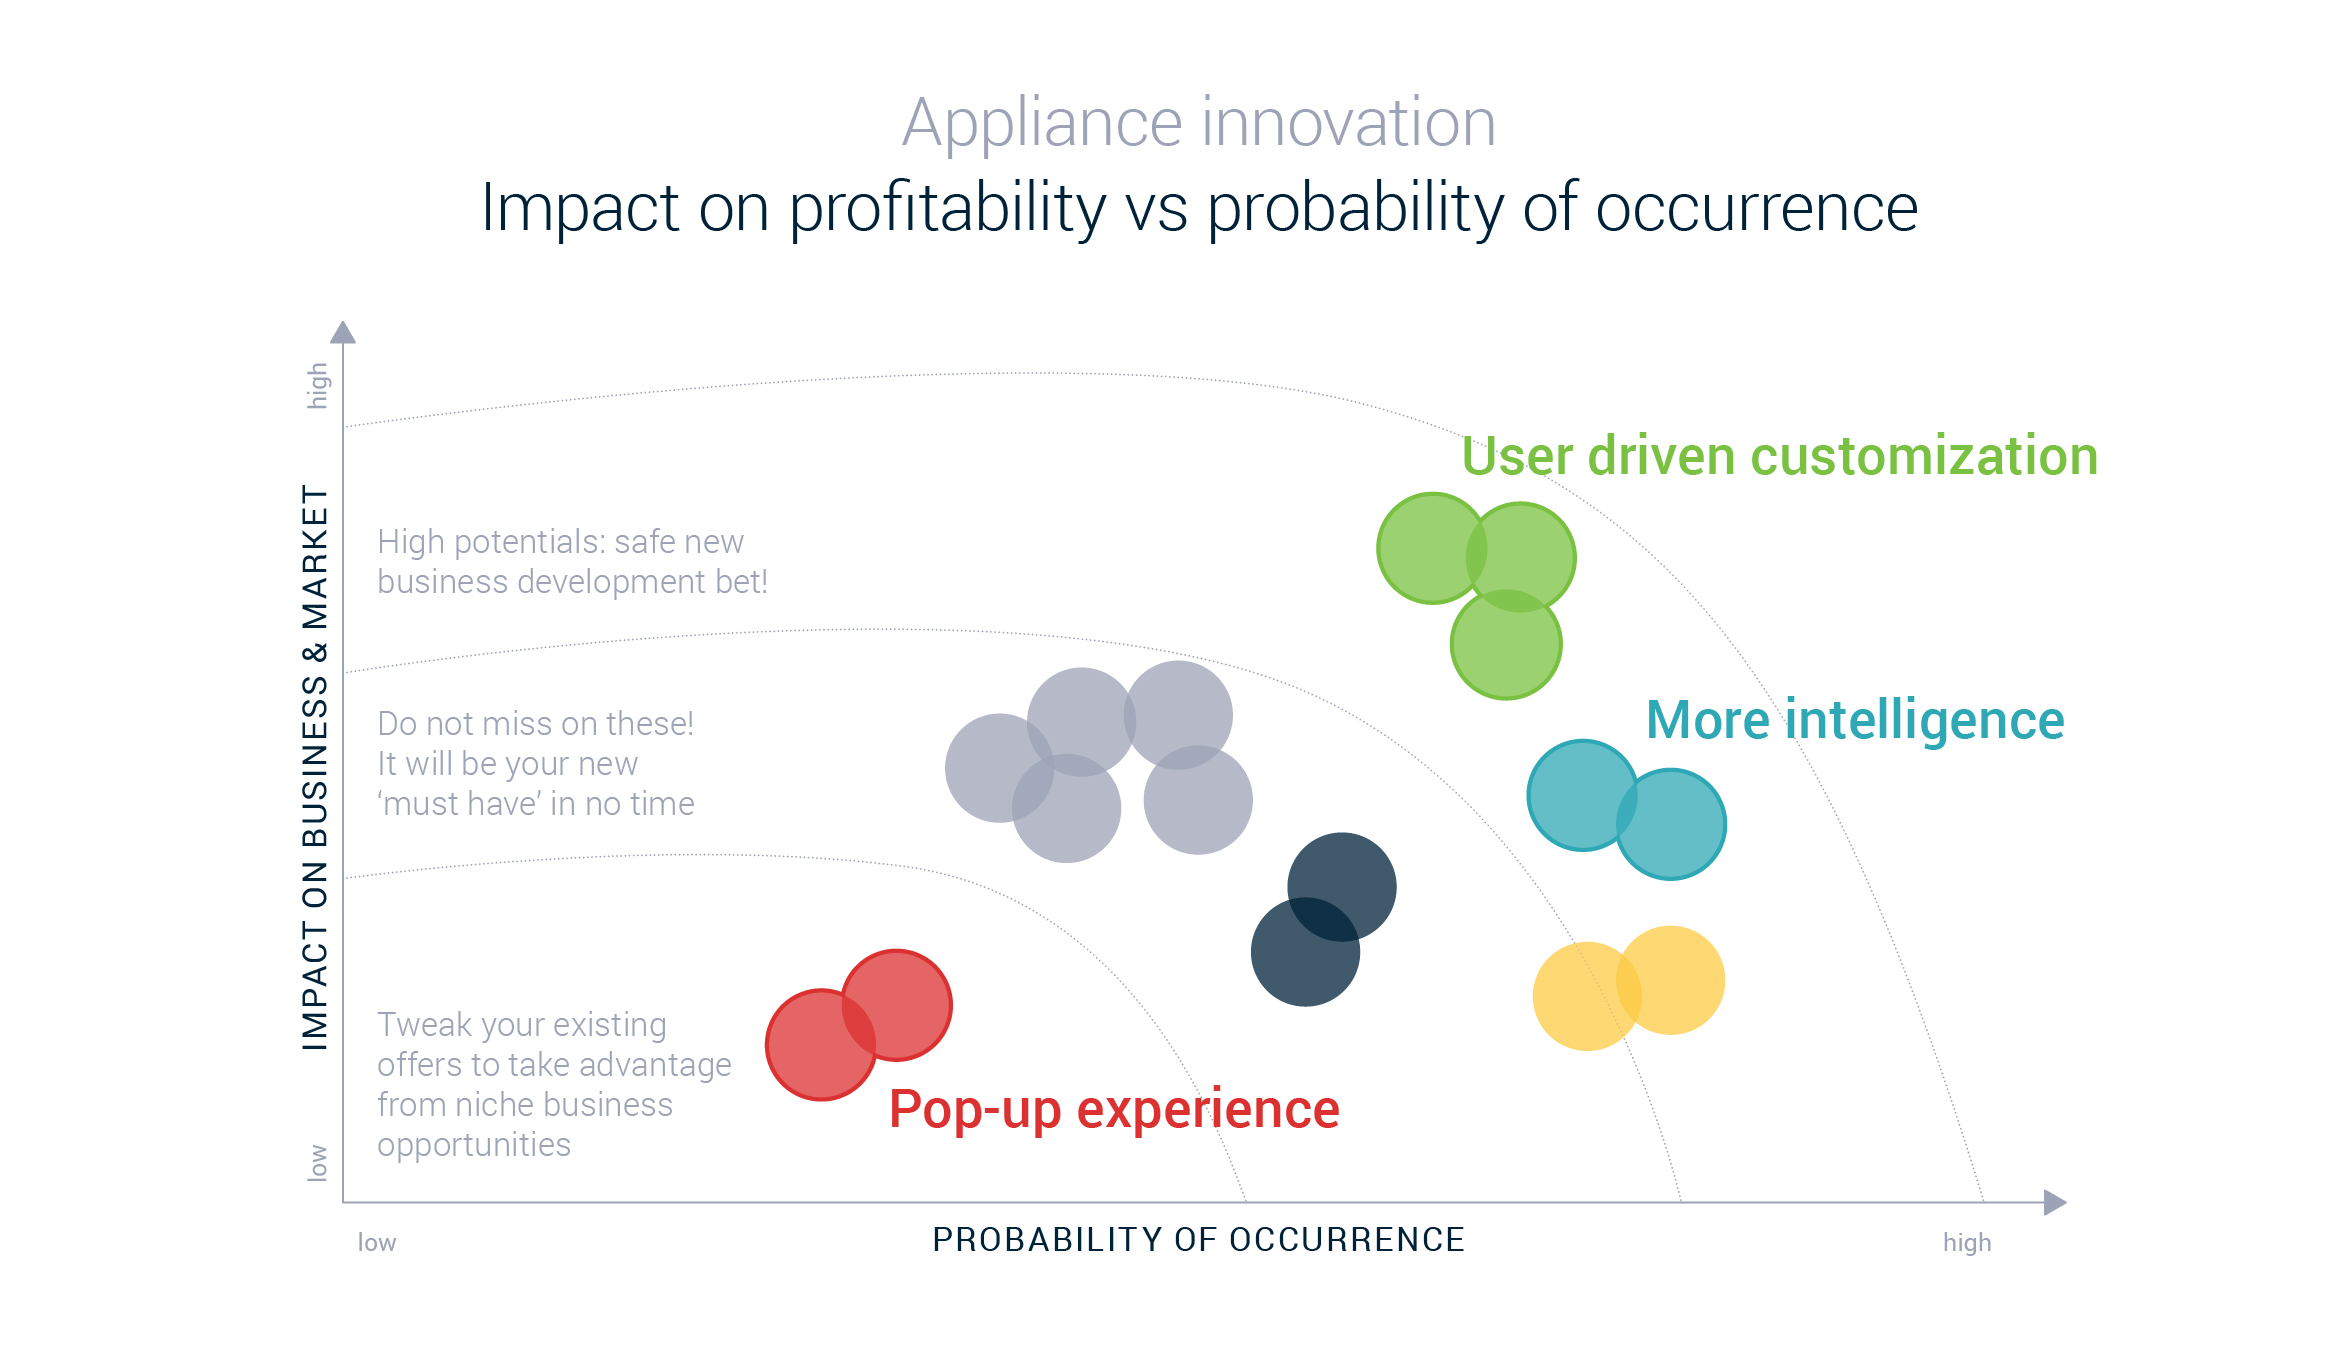 Impact on profitability & probability of occurrence in appliance innovation